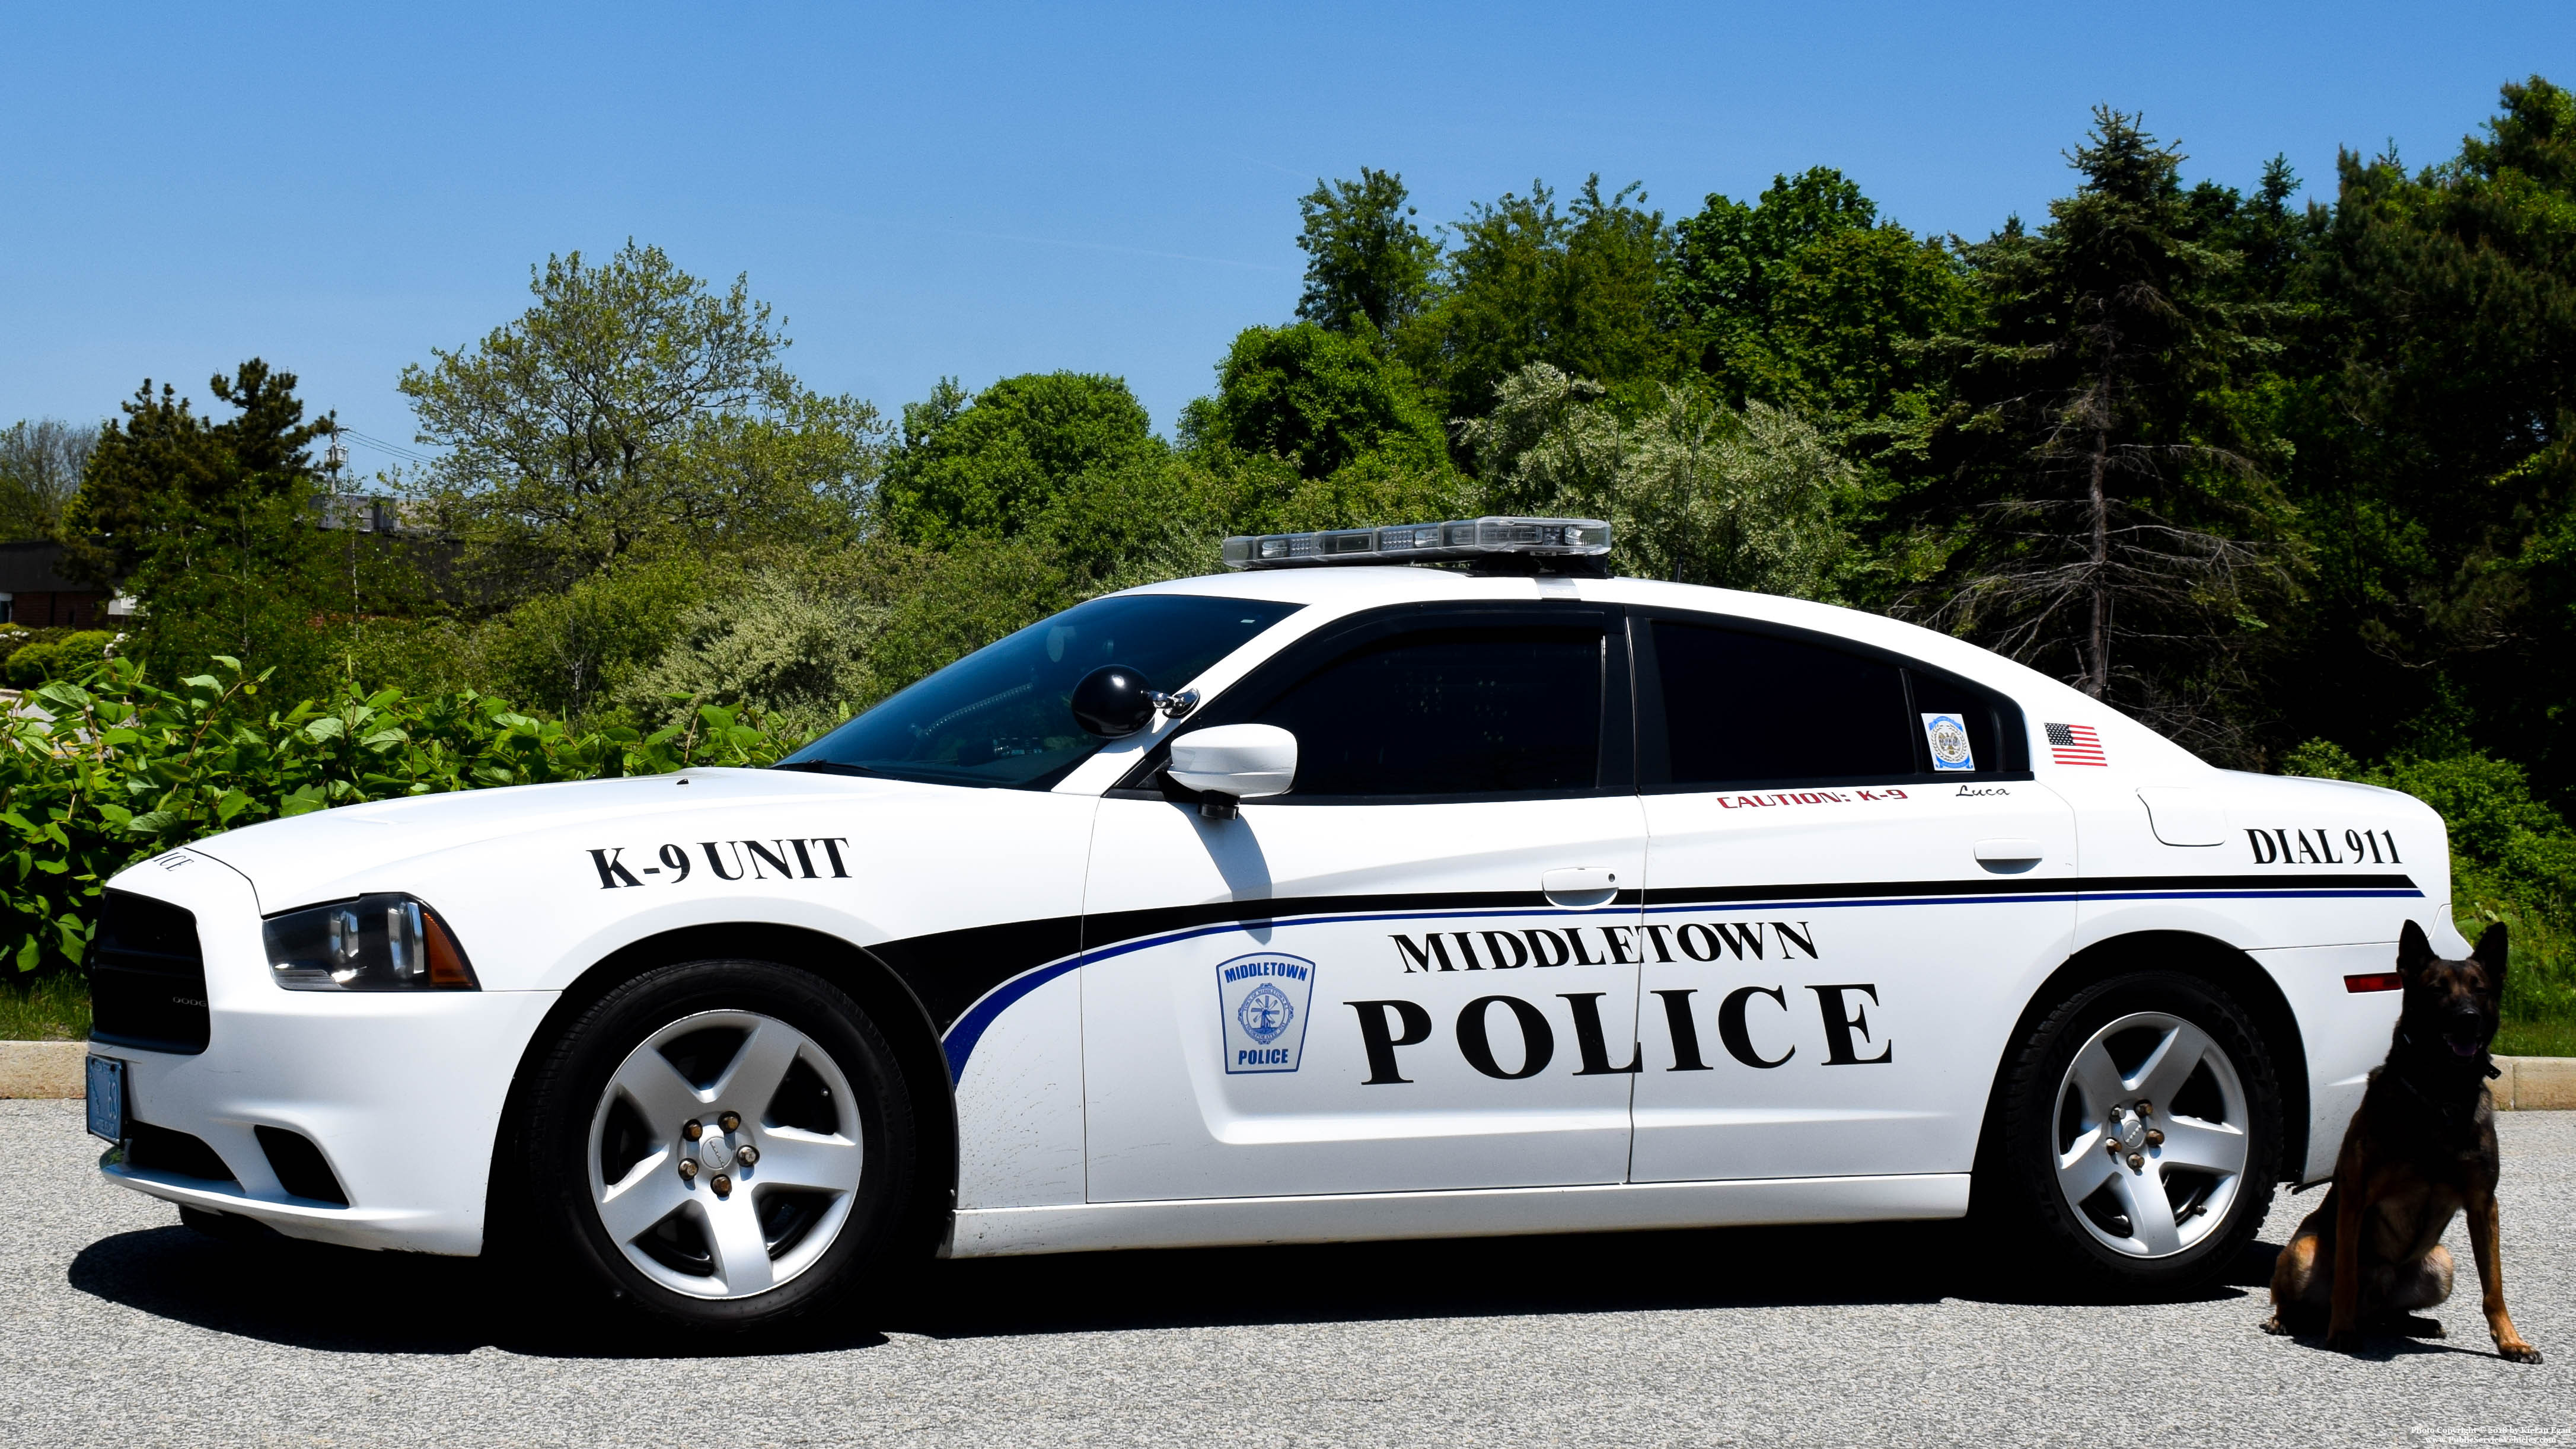 A photo  of Middletown Police
            Cruiser 63, a 2014 Dodge Charger             taken by Kieran Egan